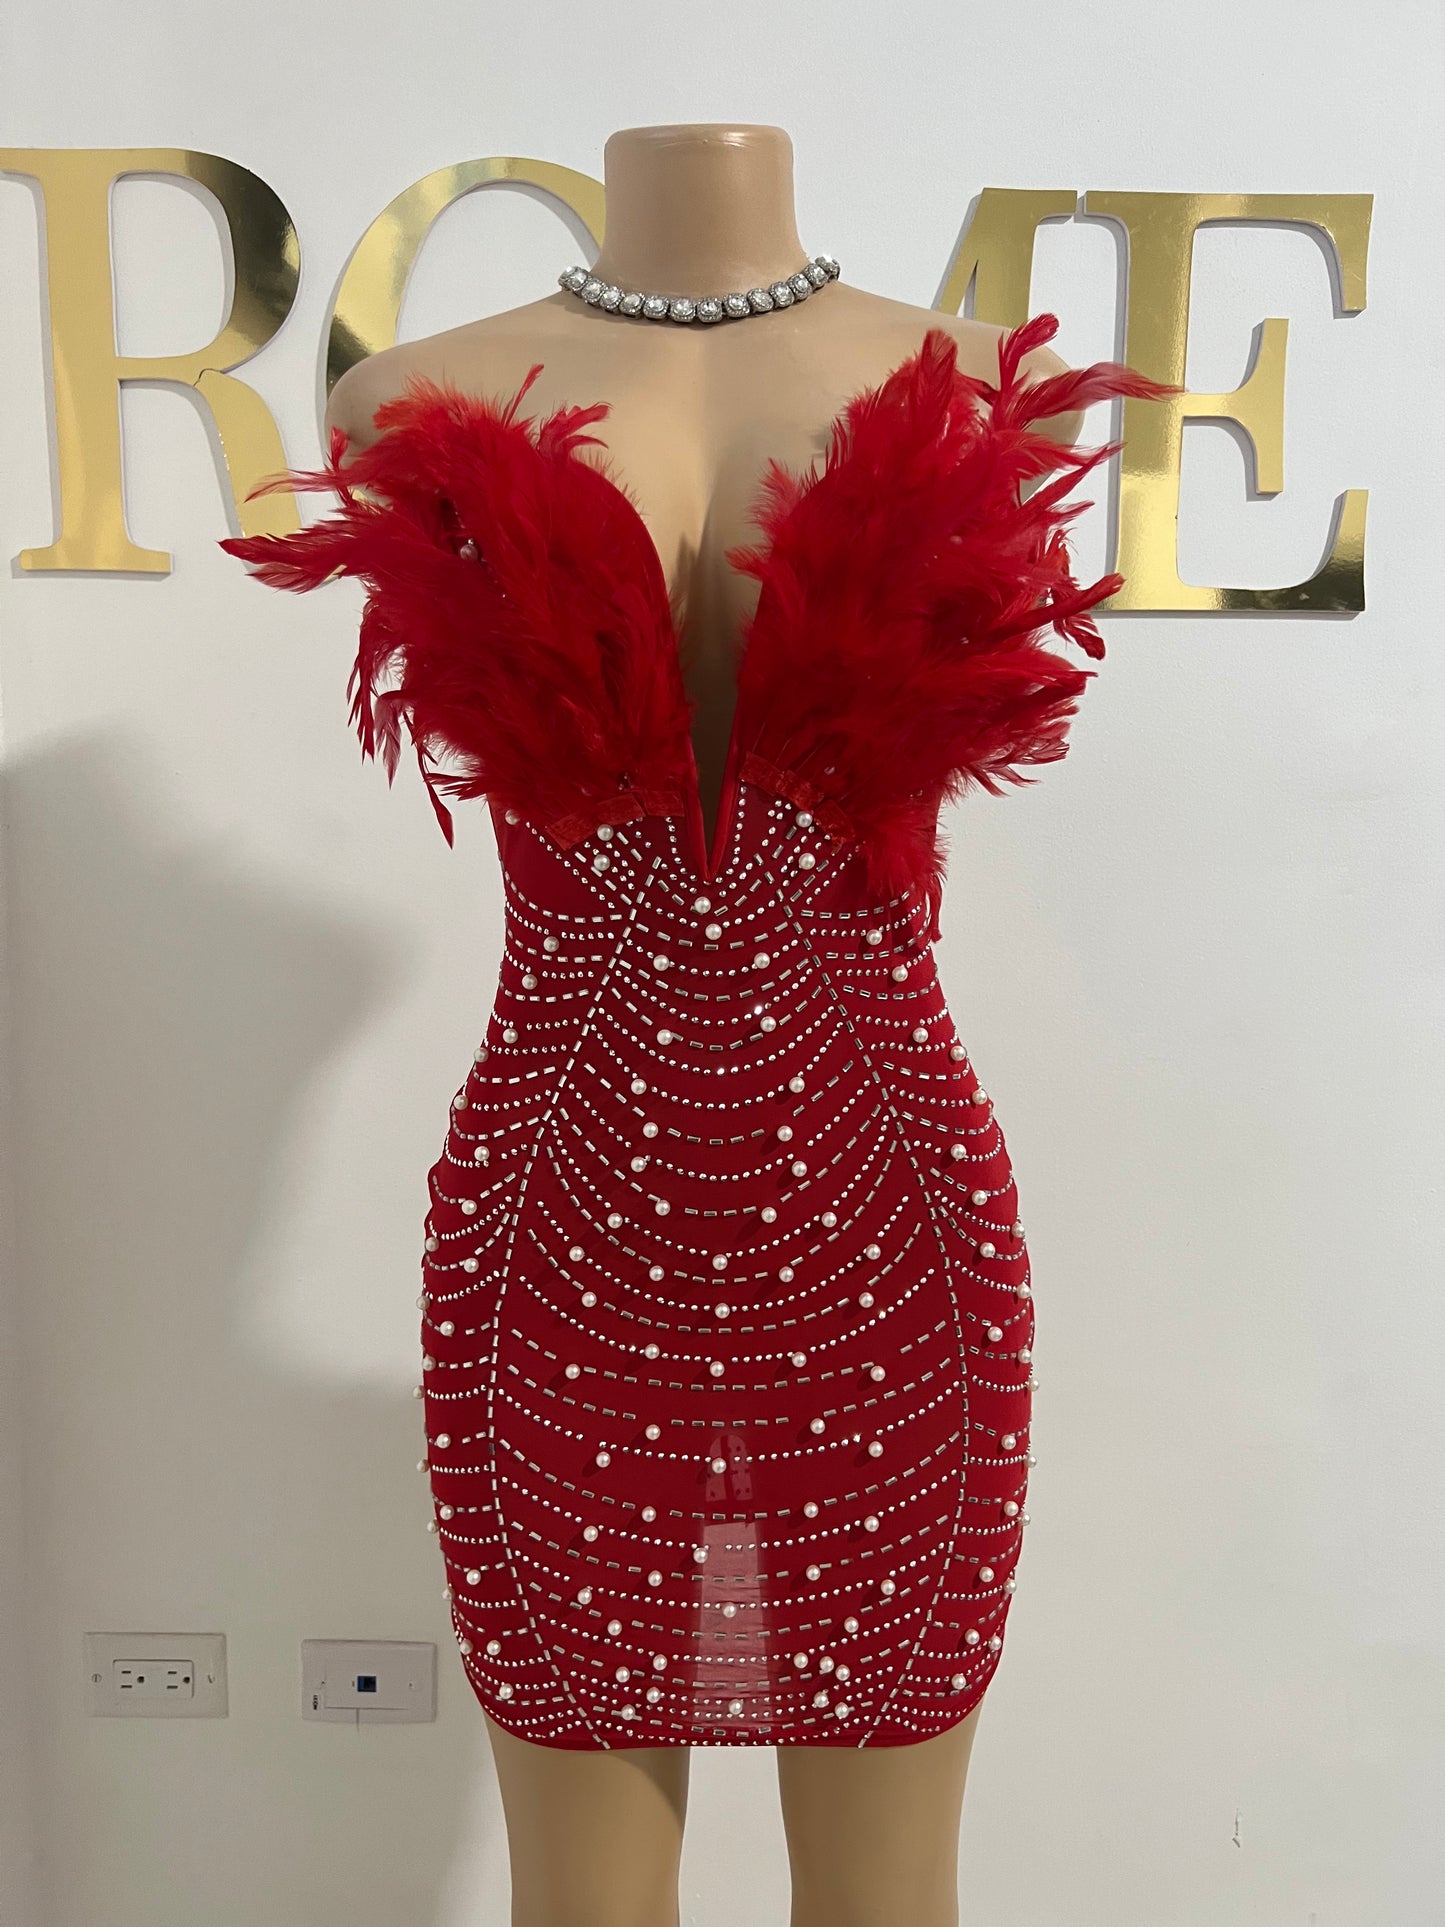 Elle Feather Crystal Dress (Red)